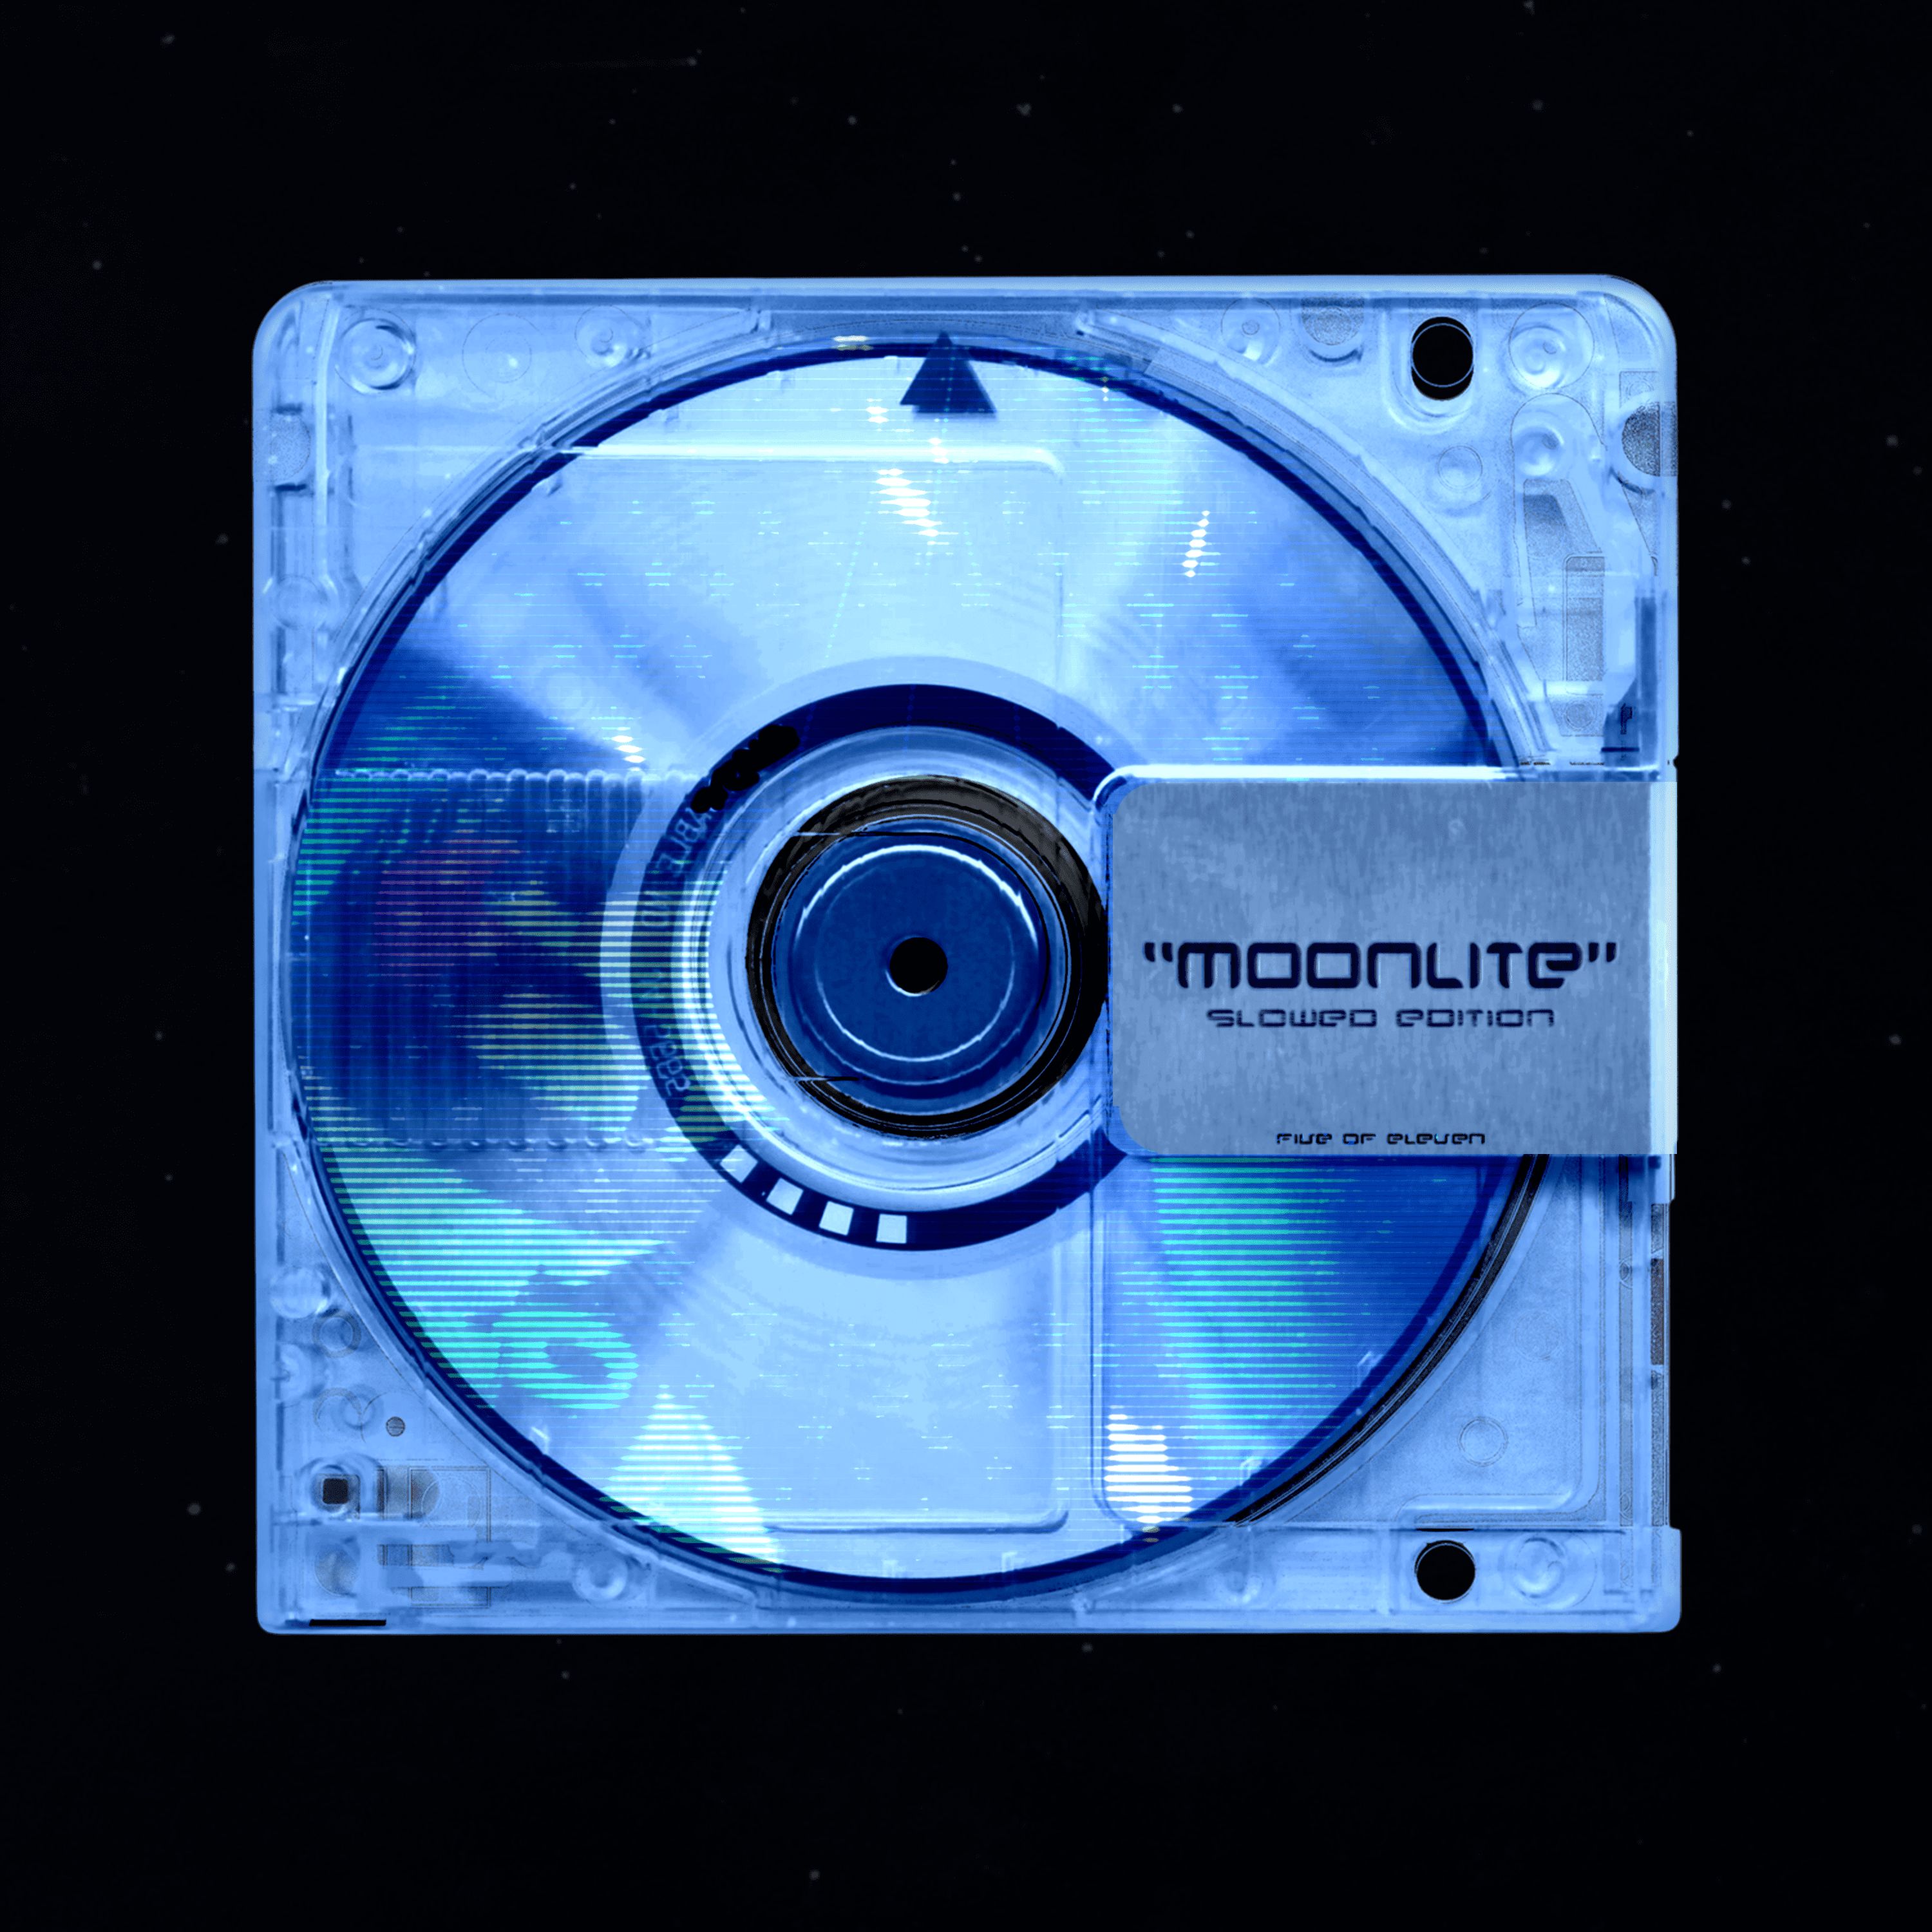 Cover art for tyler coolidge's song: MOONLITE (SLOWED EDITION)